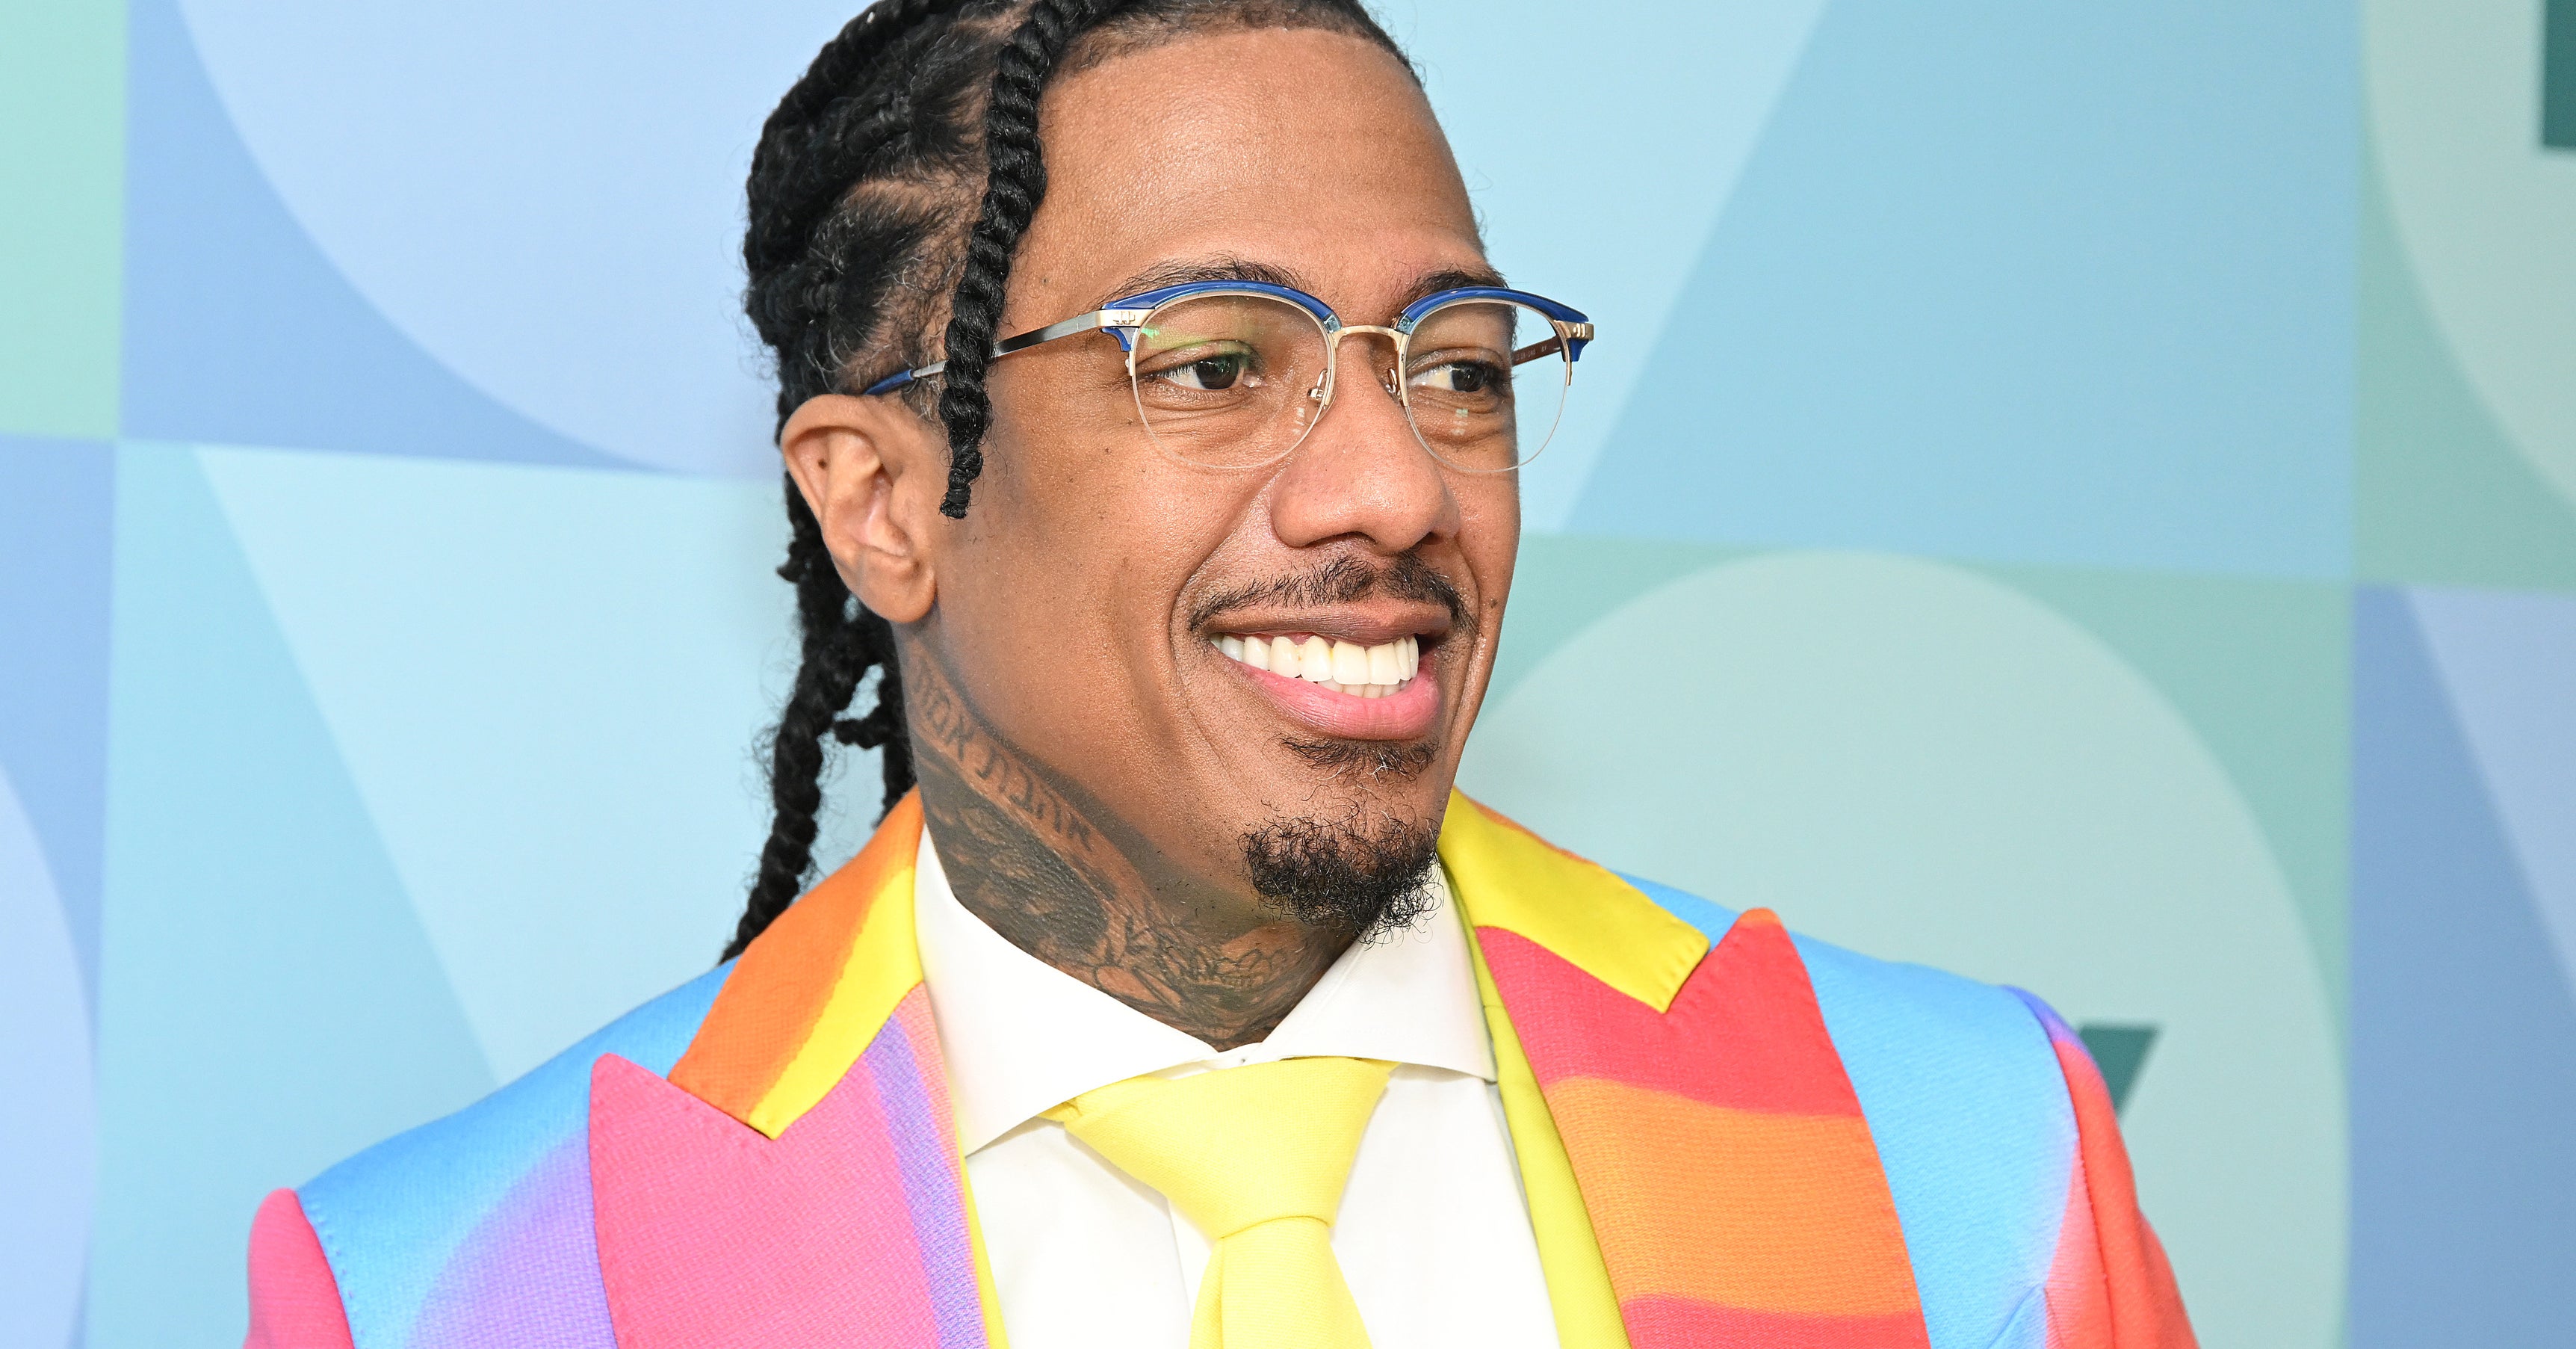 Nick Cannon Roasted For Saying He Wants To Give His 11 Kids “The Opportunity To Connect” With Him On Father’s Day 